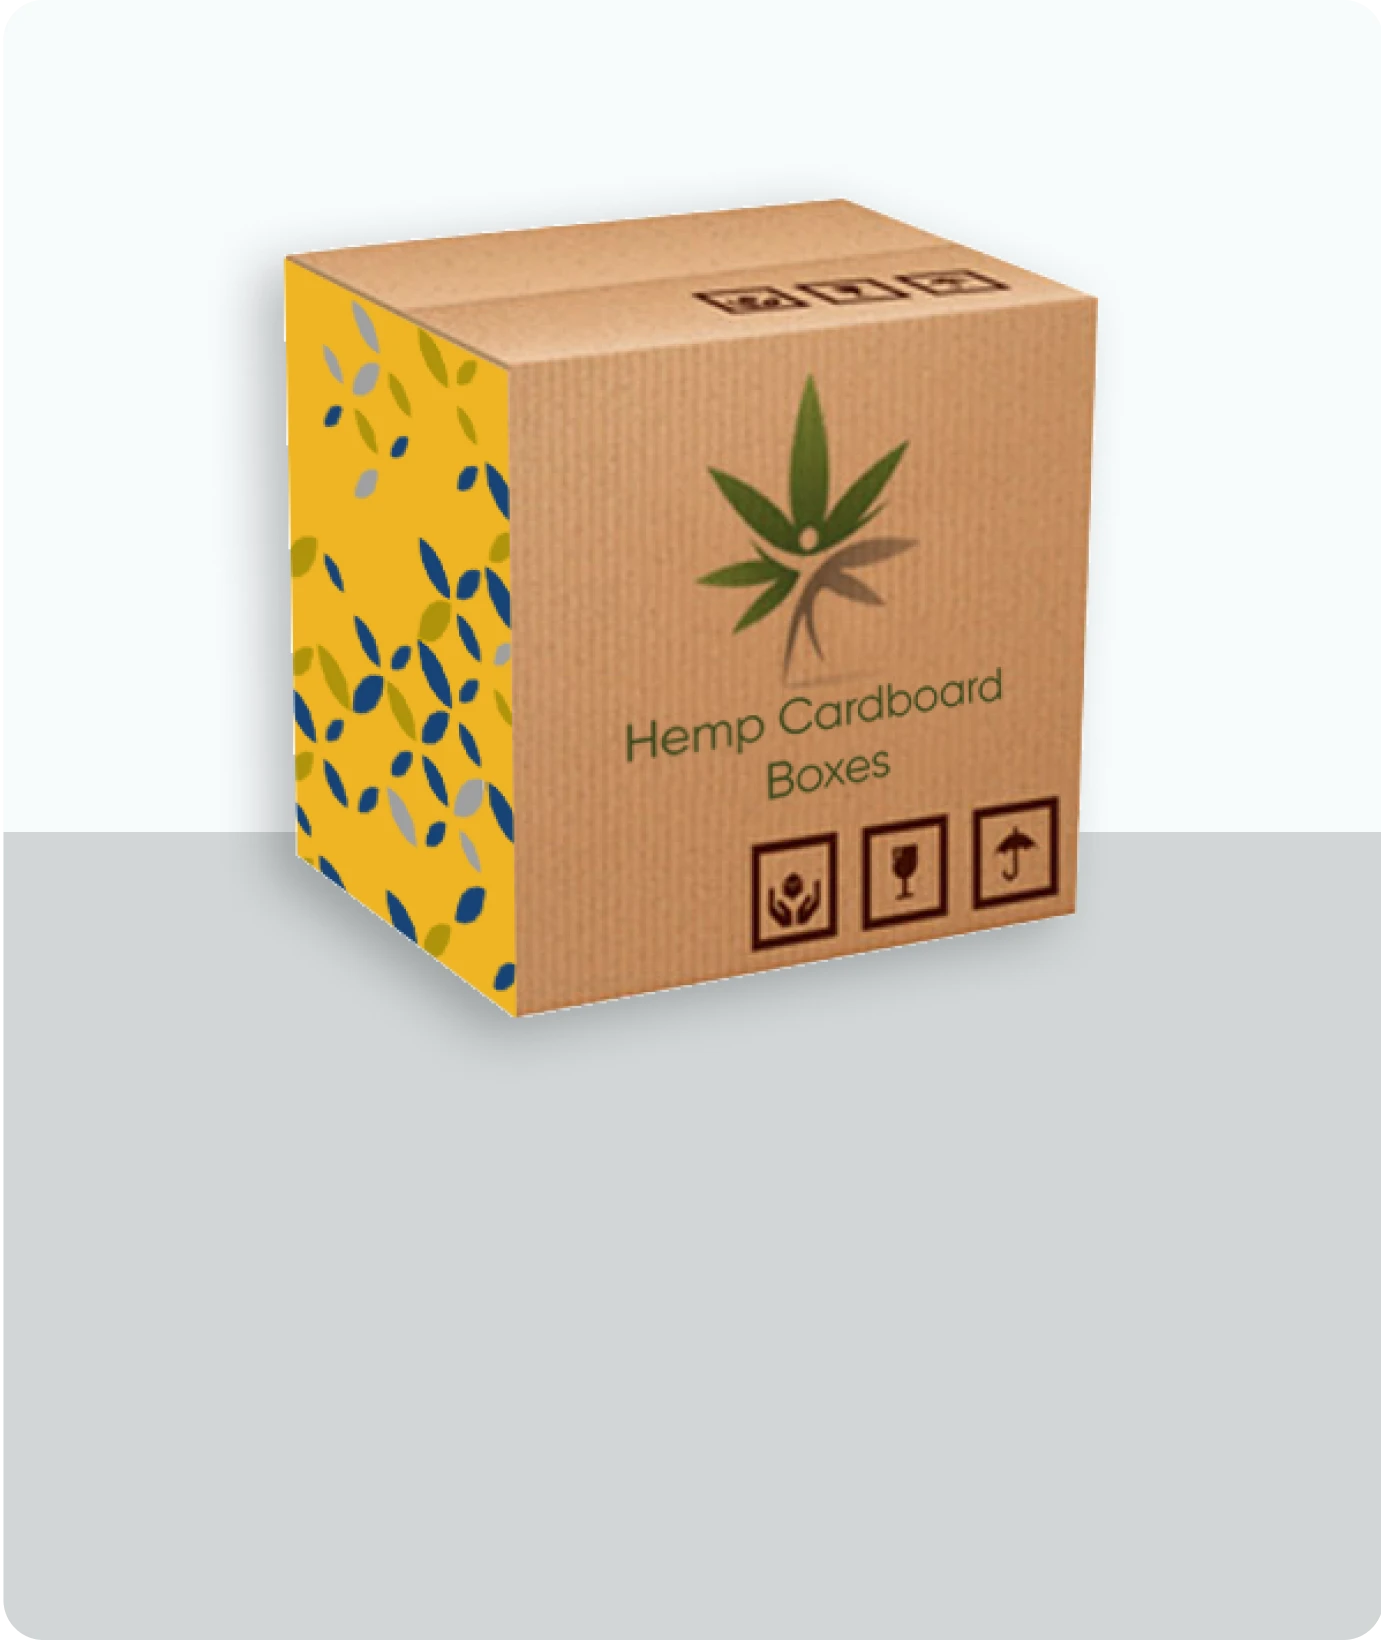 Hemp Cardboard Boxes related product image | The Box Lane